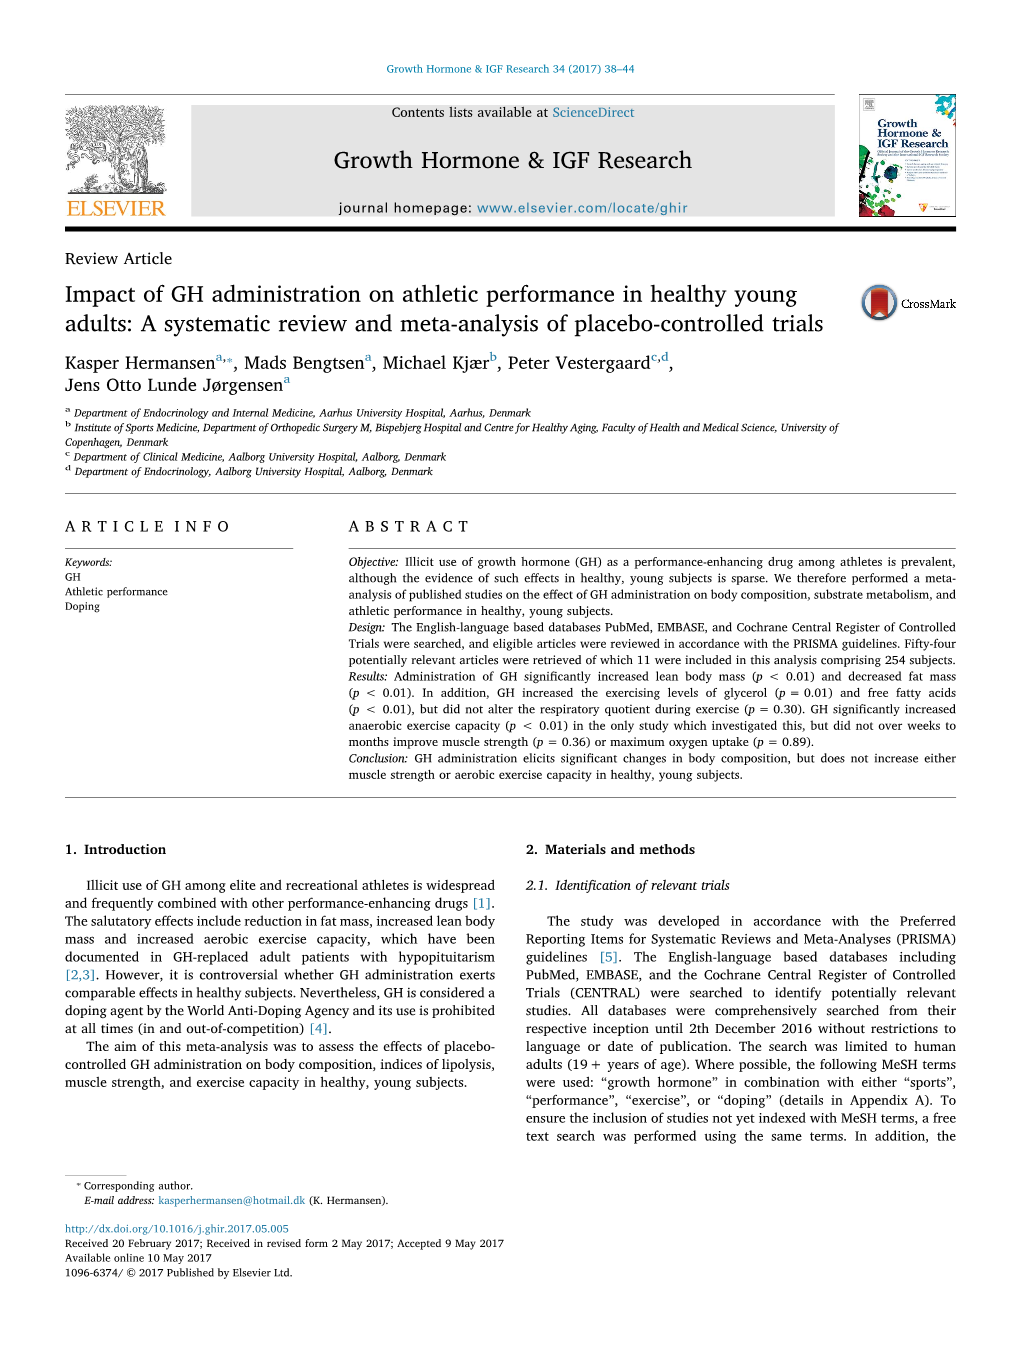 Impact of GH Administration on Athletic Performance in Healthy Young Adults: a Systematic Review and Meta-Analysis of Placebo-Controlled Trials MARK